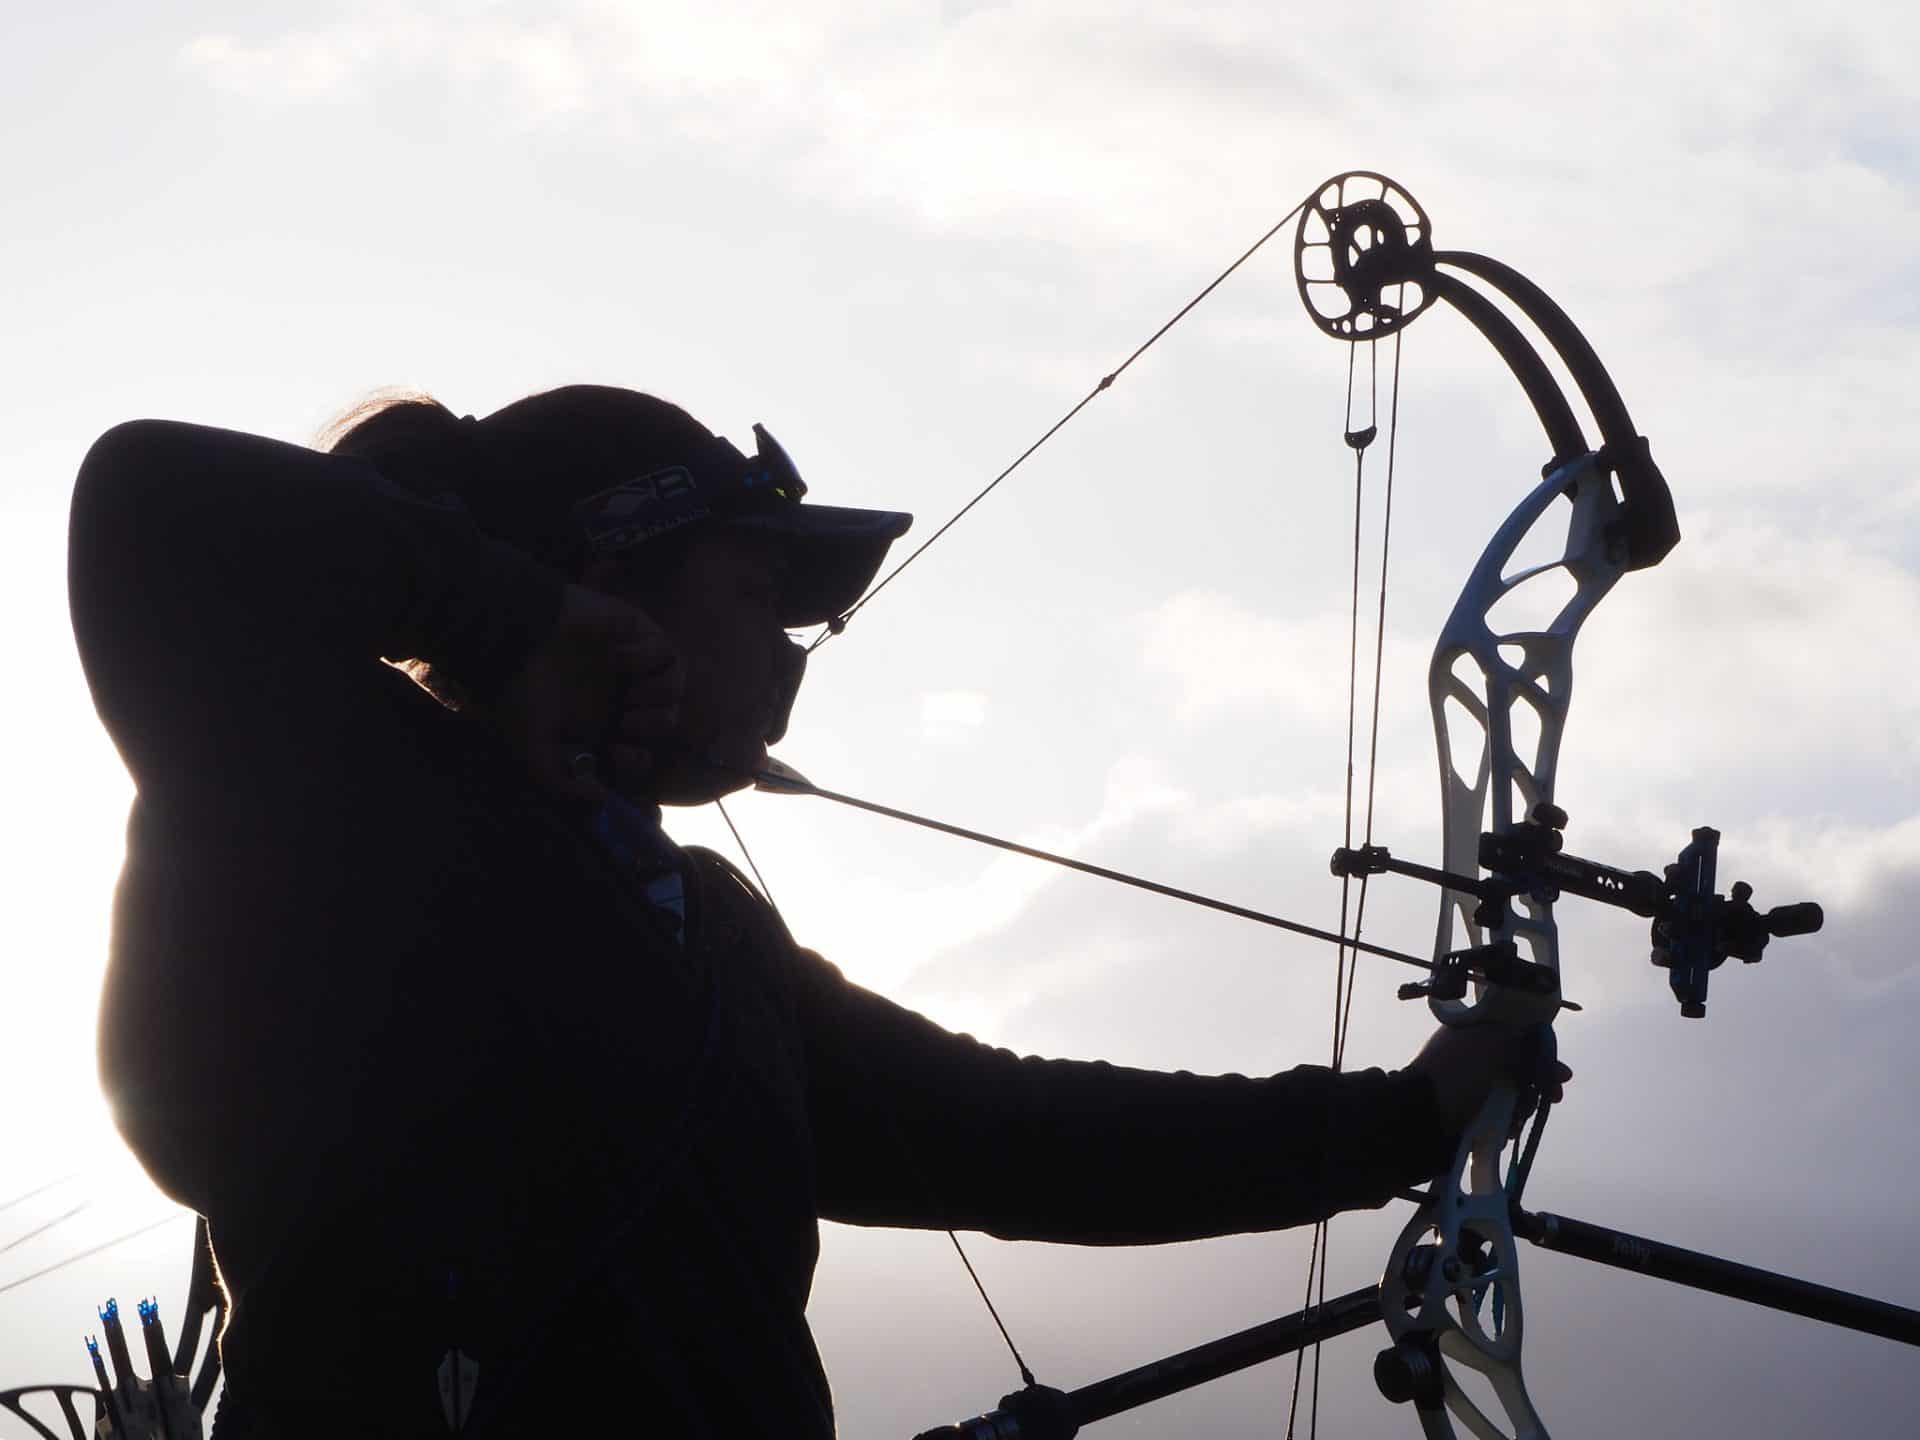 Archery on screen: TV and film round-up